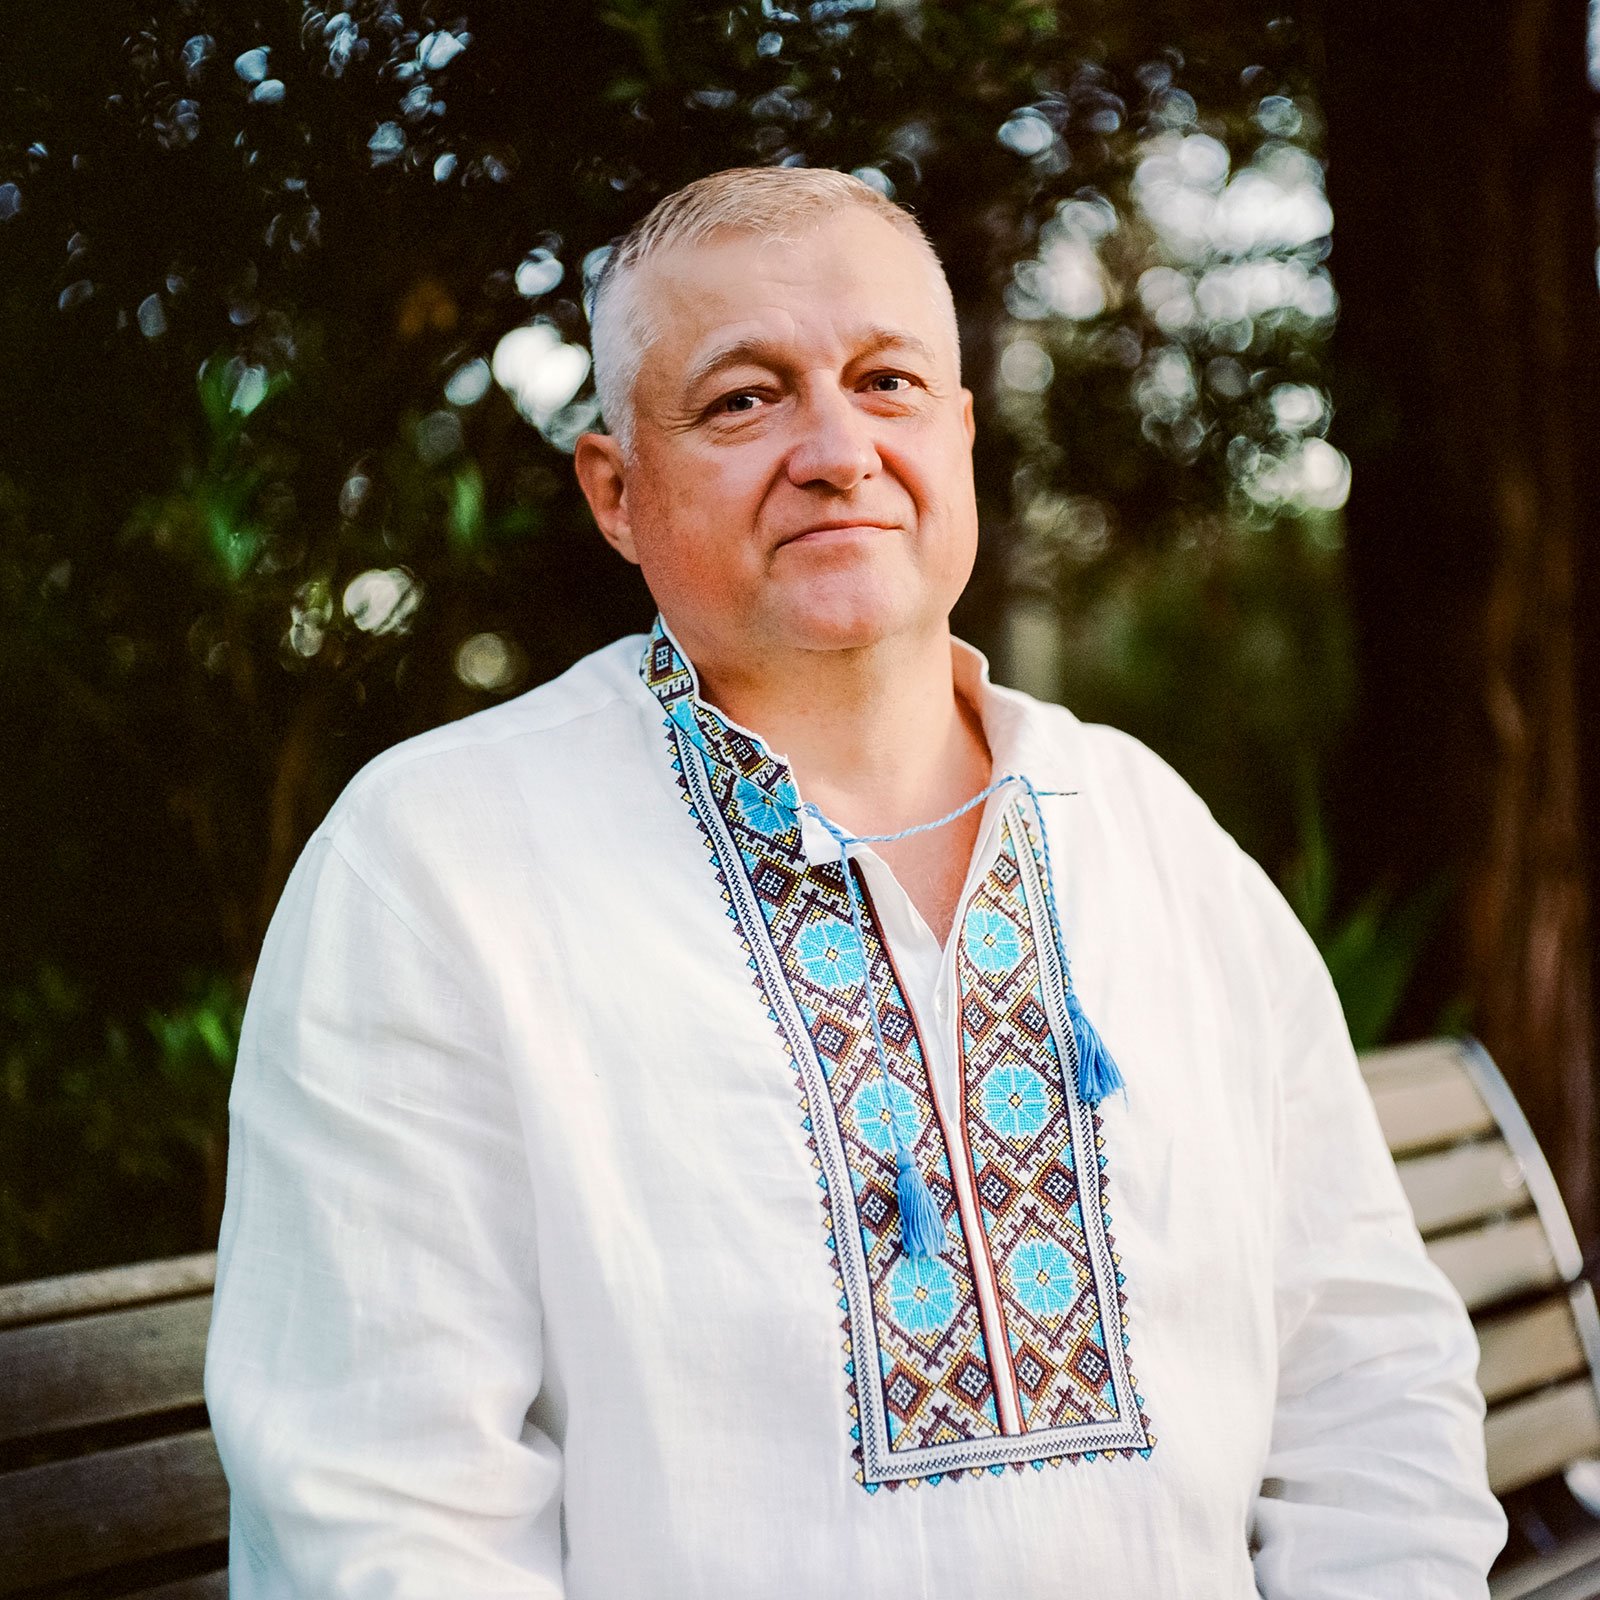 Older Ukrainian man in traditional white and blue attire